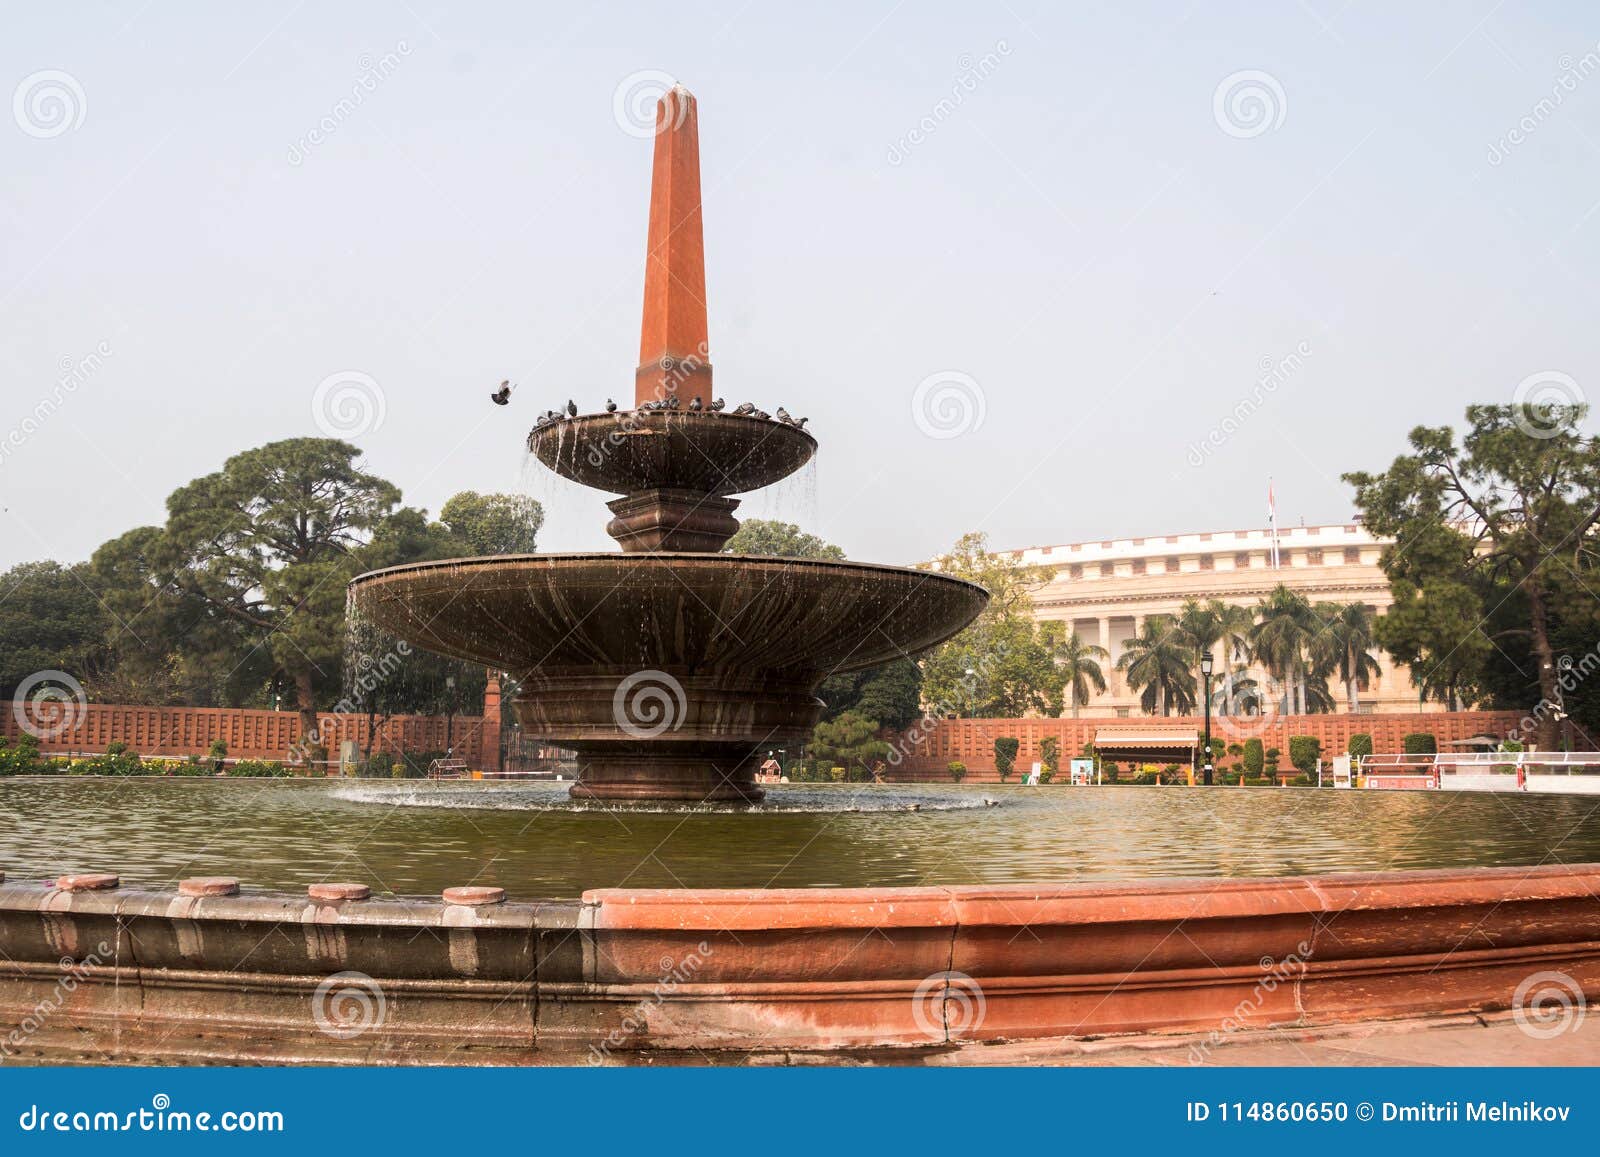 fountain in front of the sansad bhawan, the parliament house